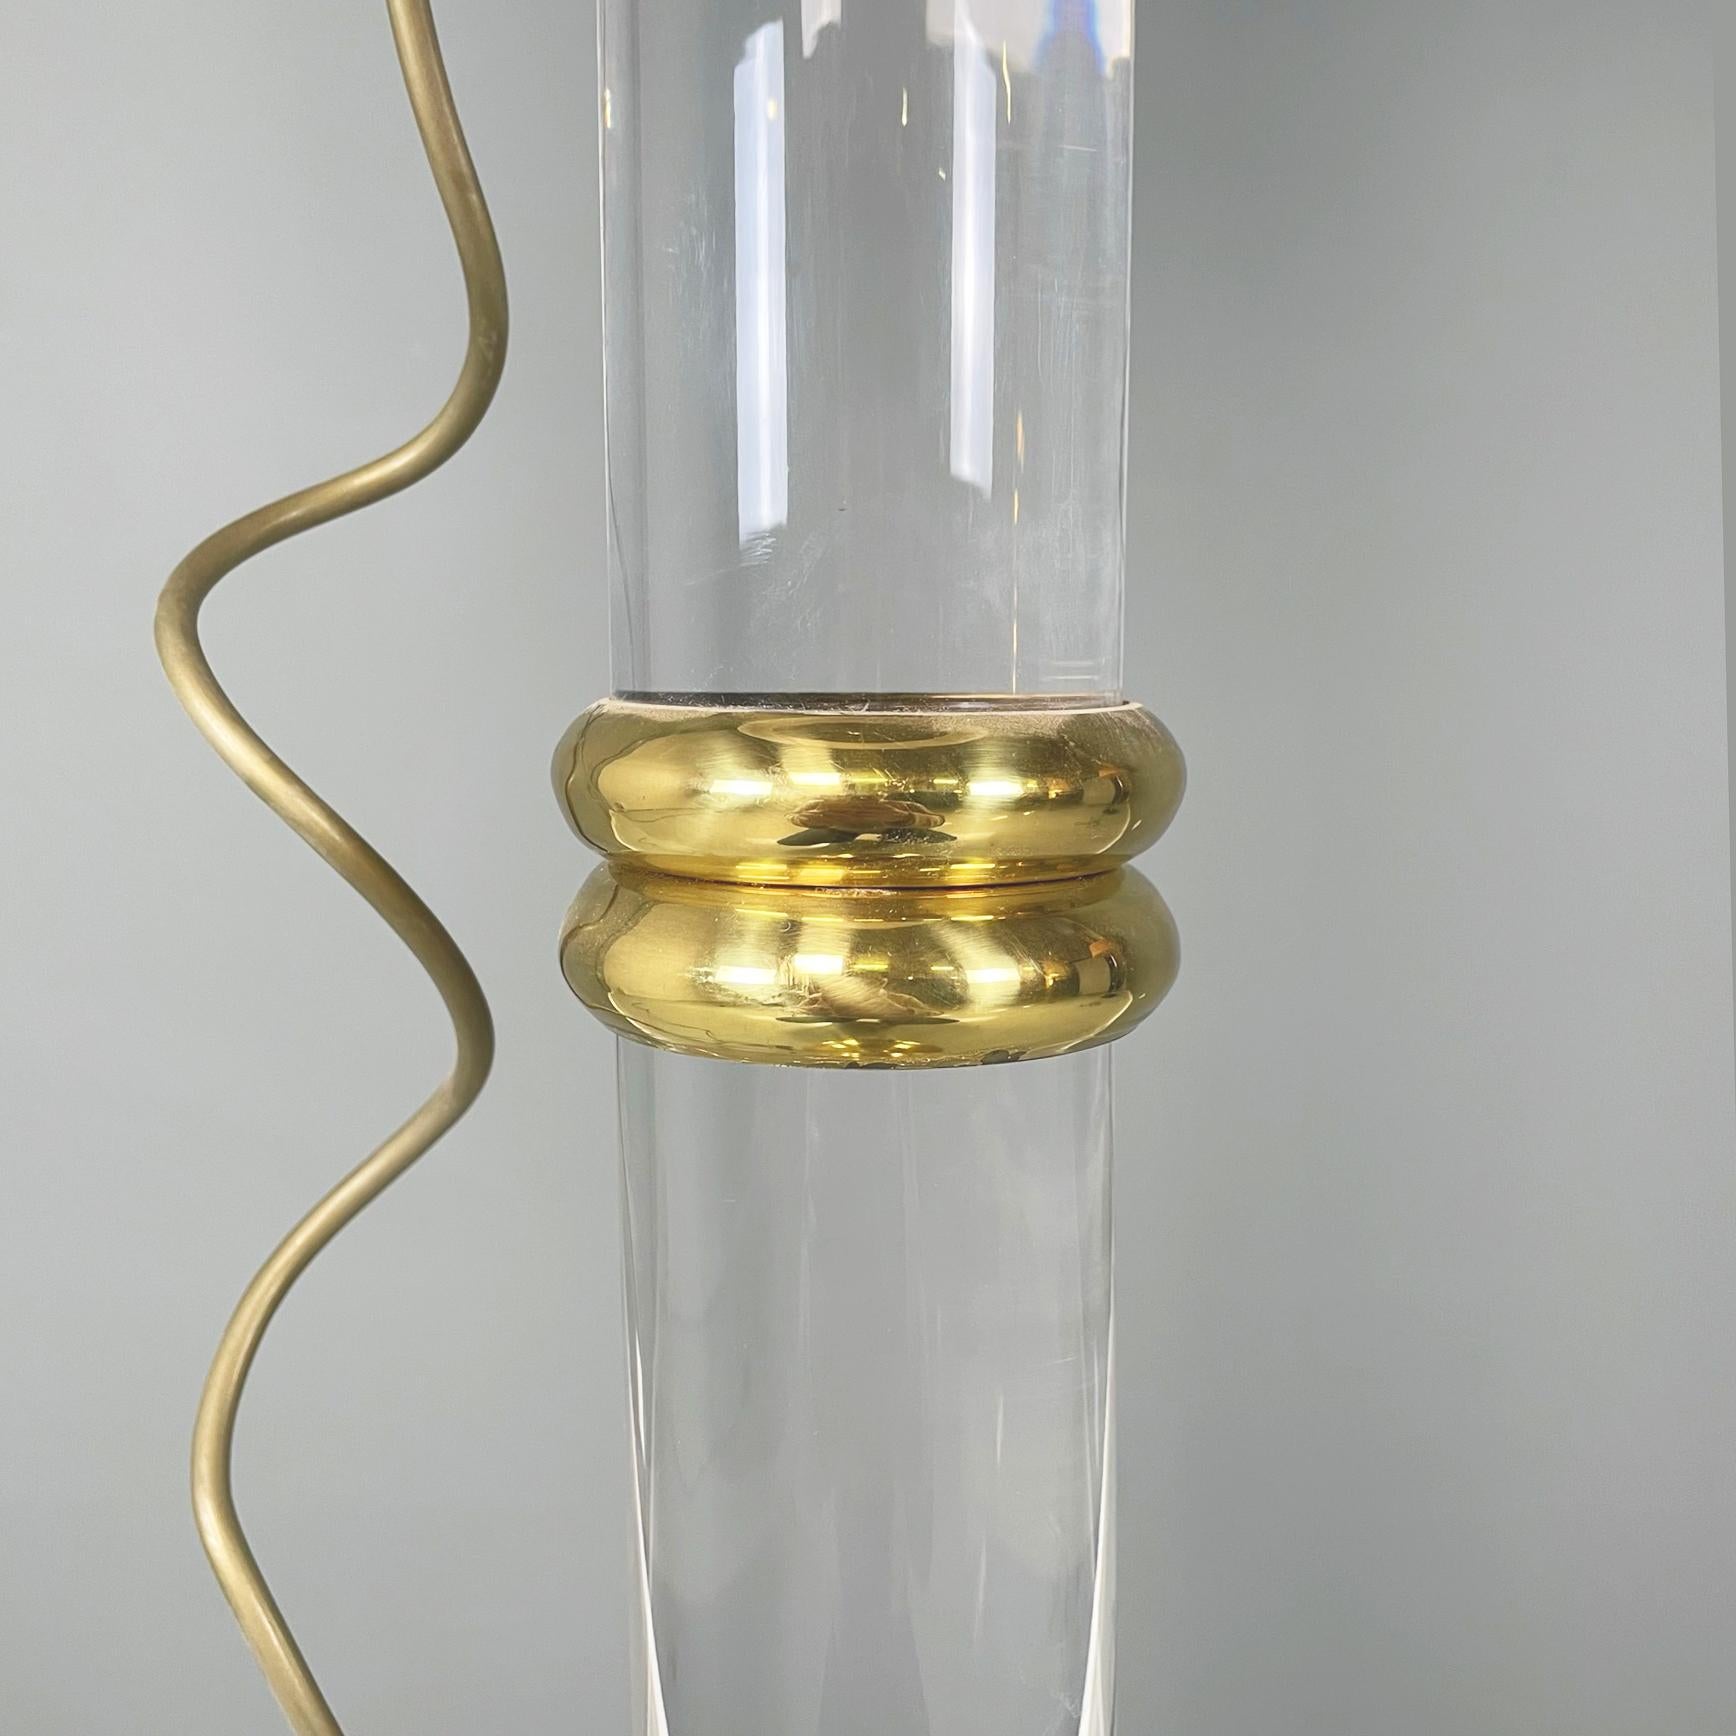 Italian Modern Floor Lamp in White Fabric Lampshade, Plexiglass and Brass, 1980s For Sale 5